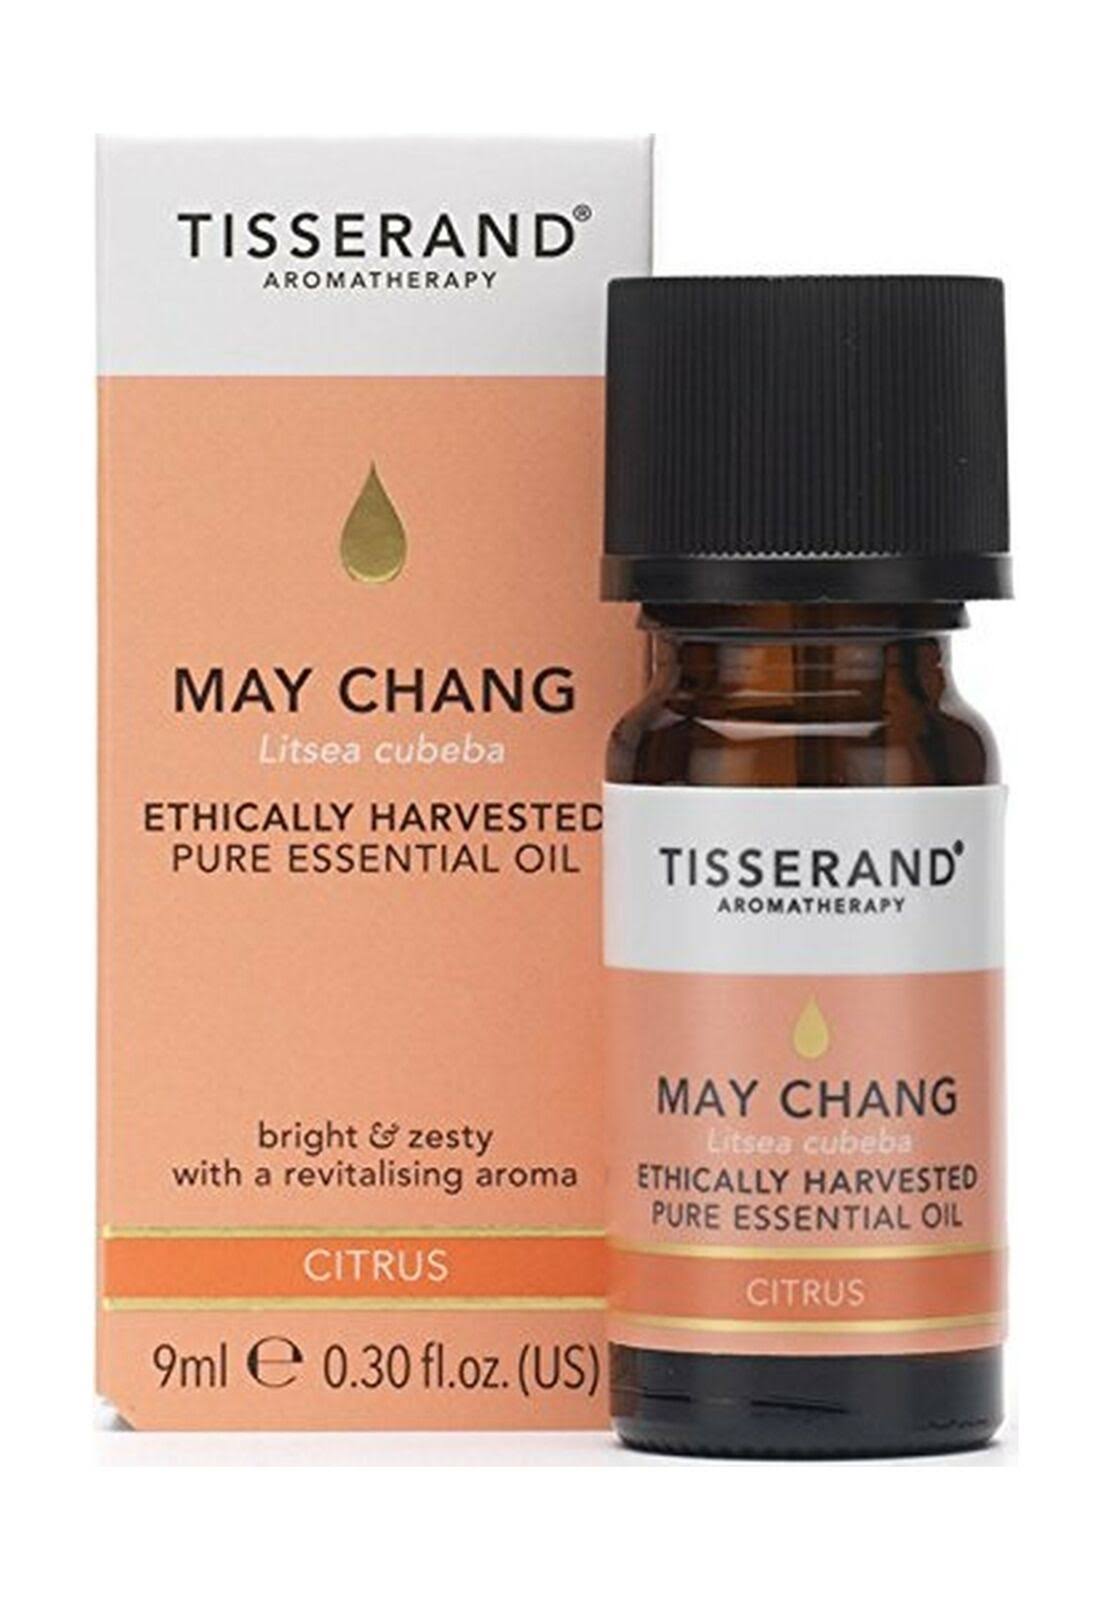 Tisserand Aromatherapy May Chang Pure Essential Oil